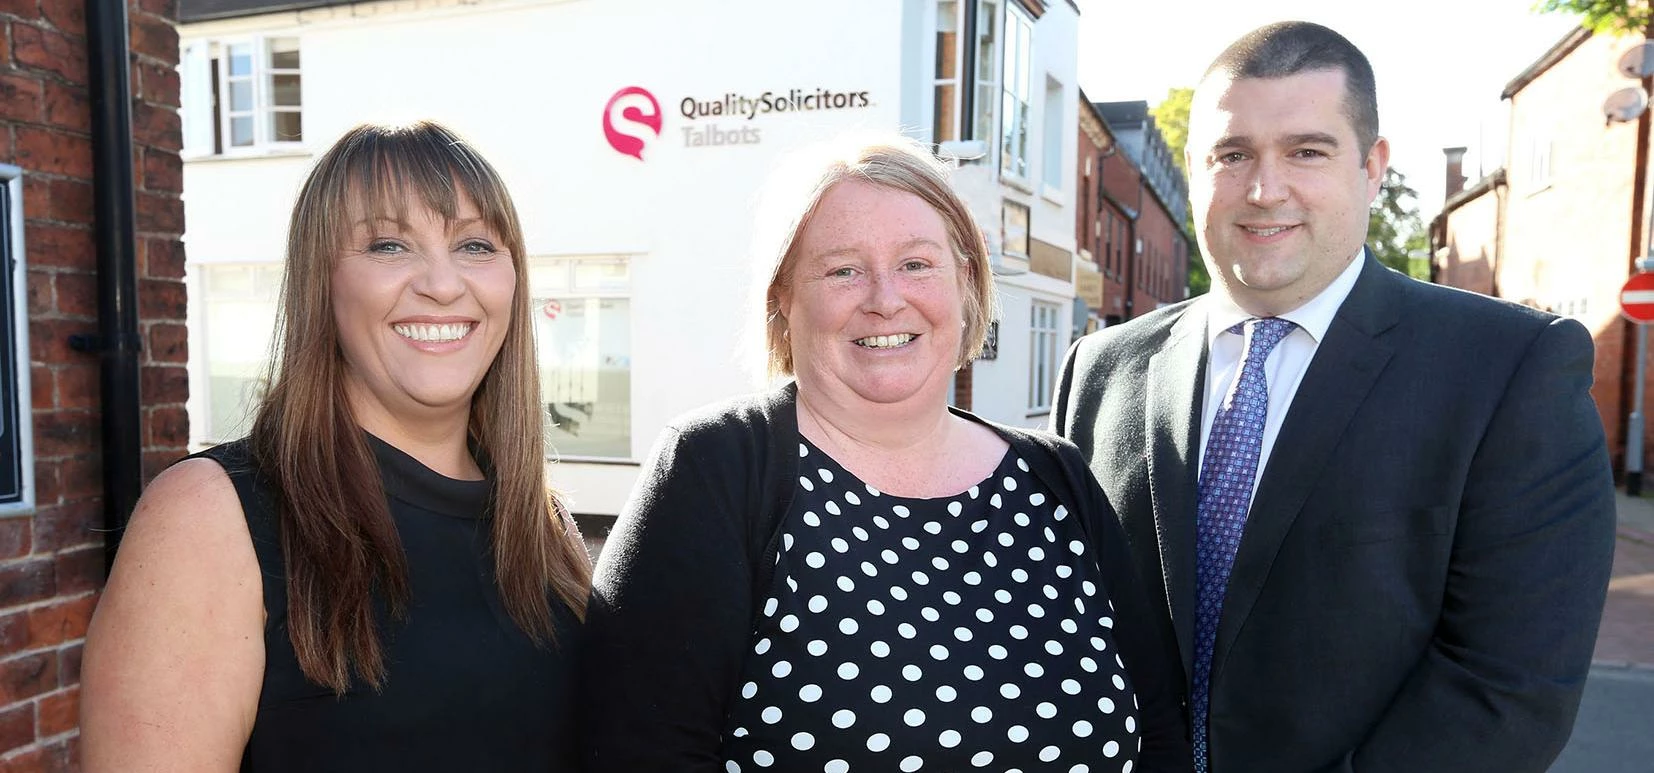 (l-r) Rebecca McMullan, Melanie Blackburn and James Wright (all QualitySolicitors Talbots) 